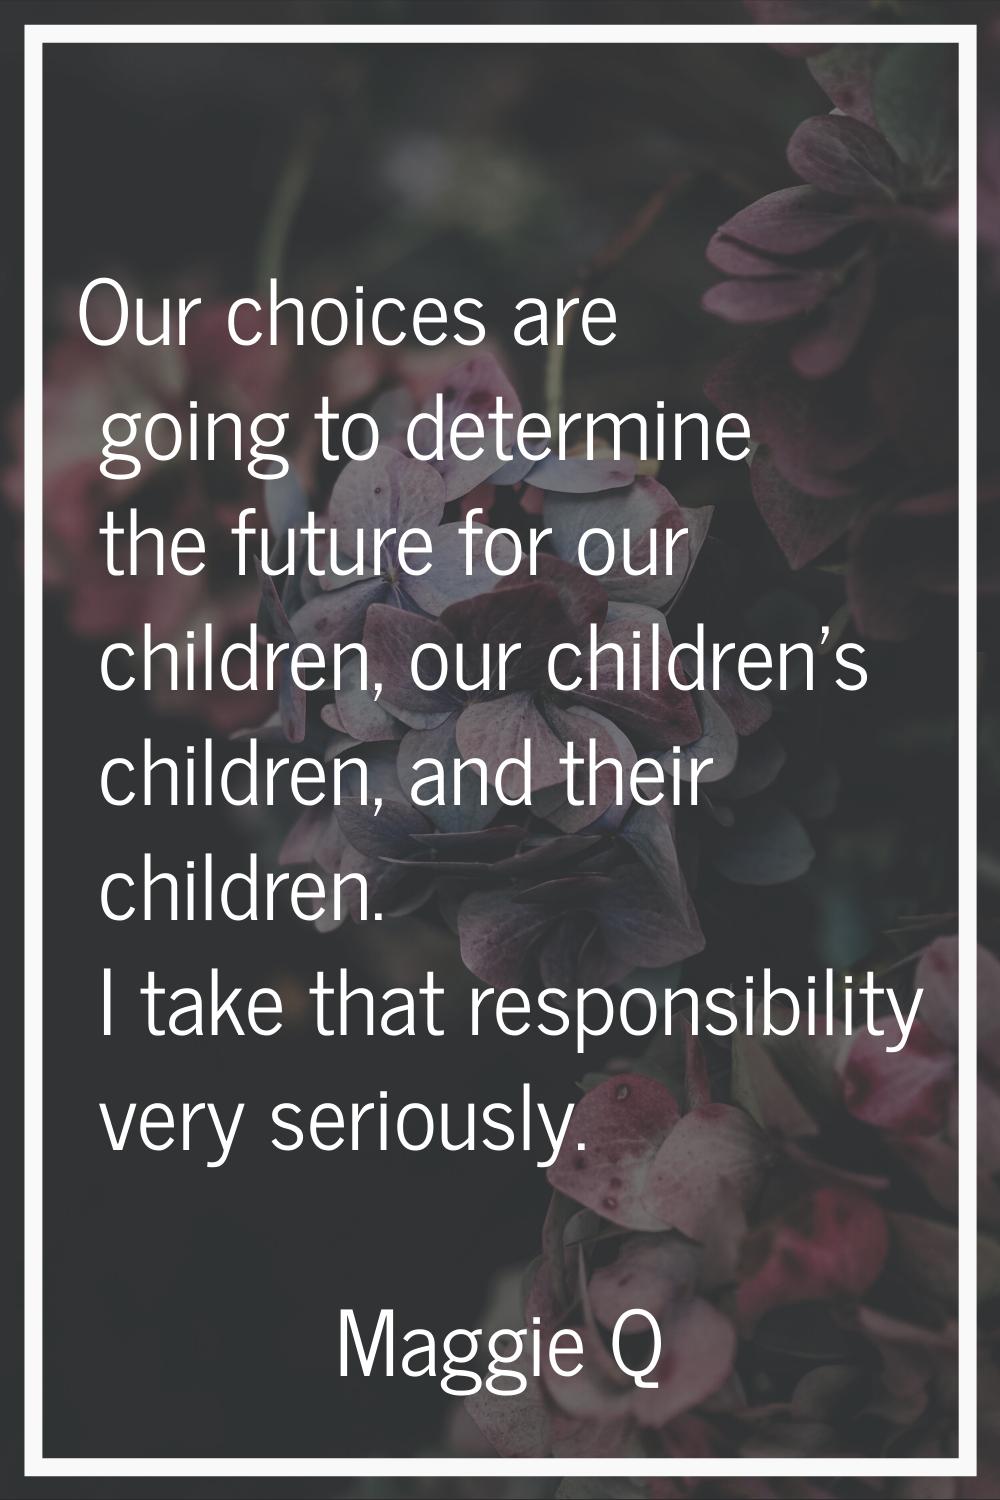 Our choices are going to determine the future for our children, our children's children, and their 